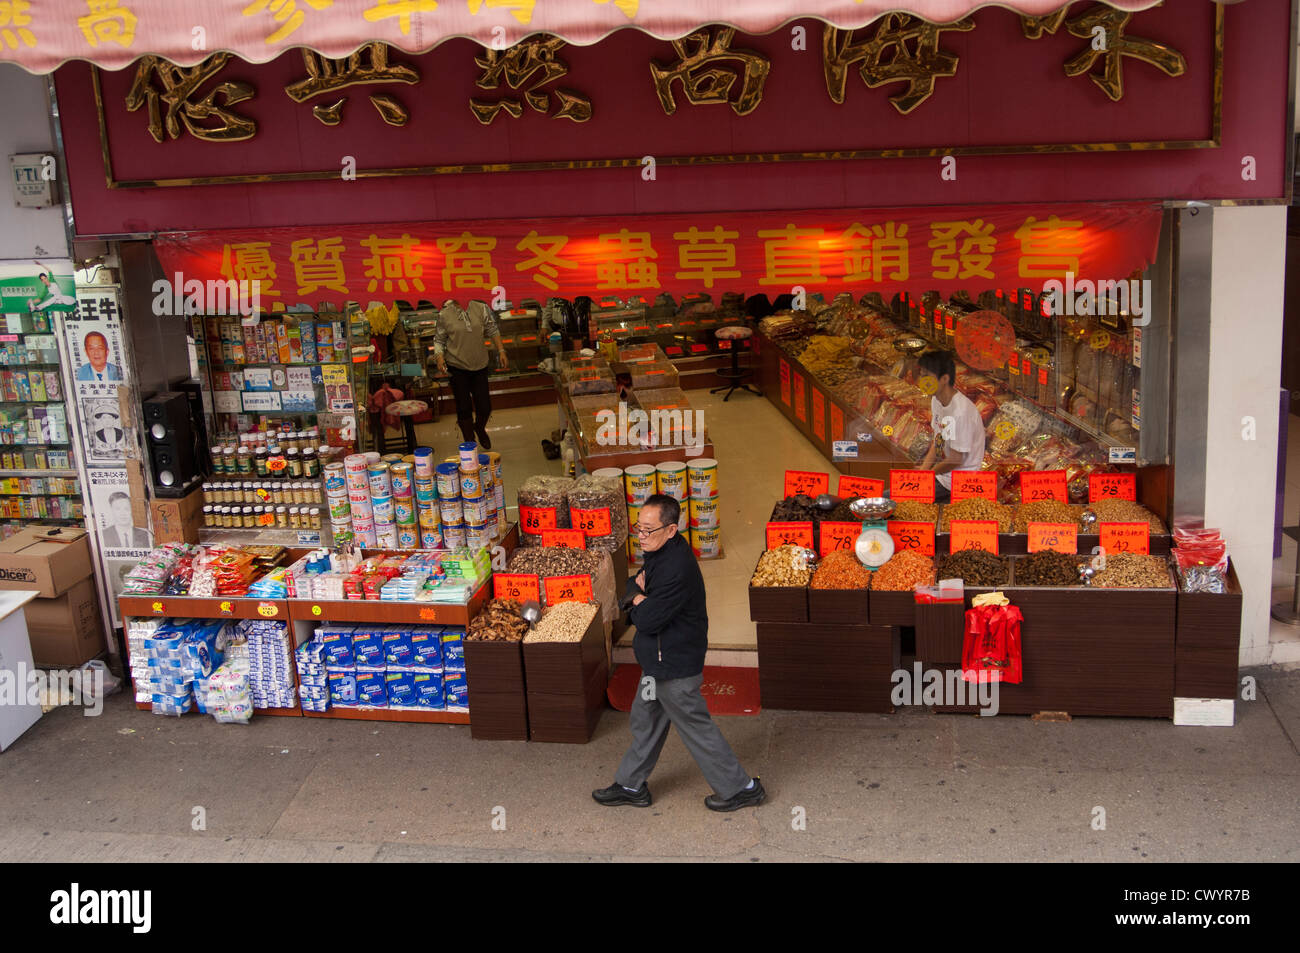 Street scene in front of a convenience store, Kowloon, Hong Kong Stock Photo